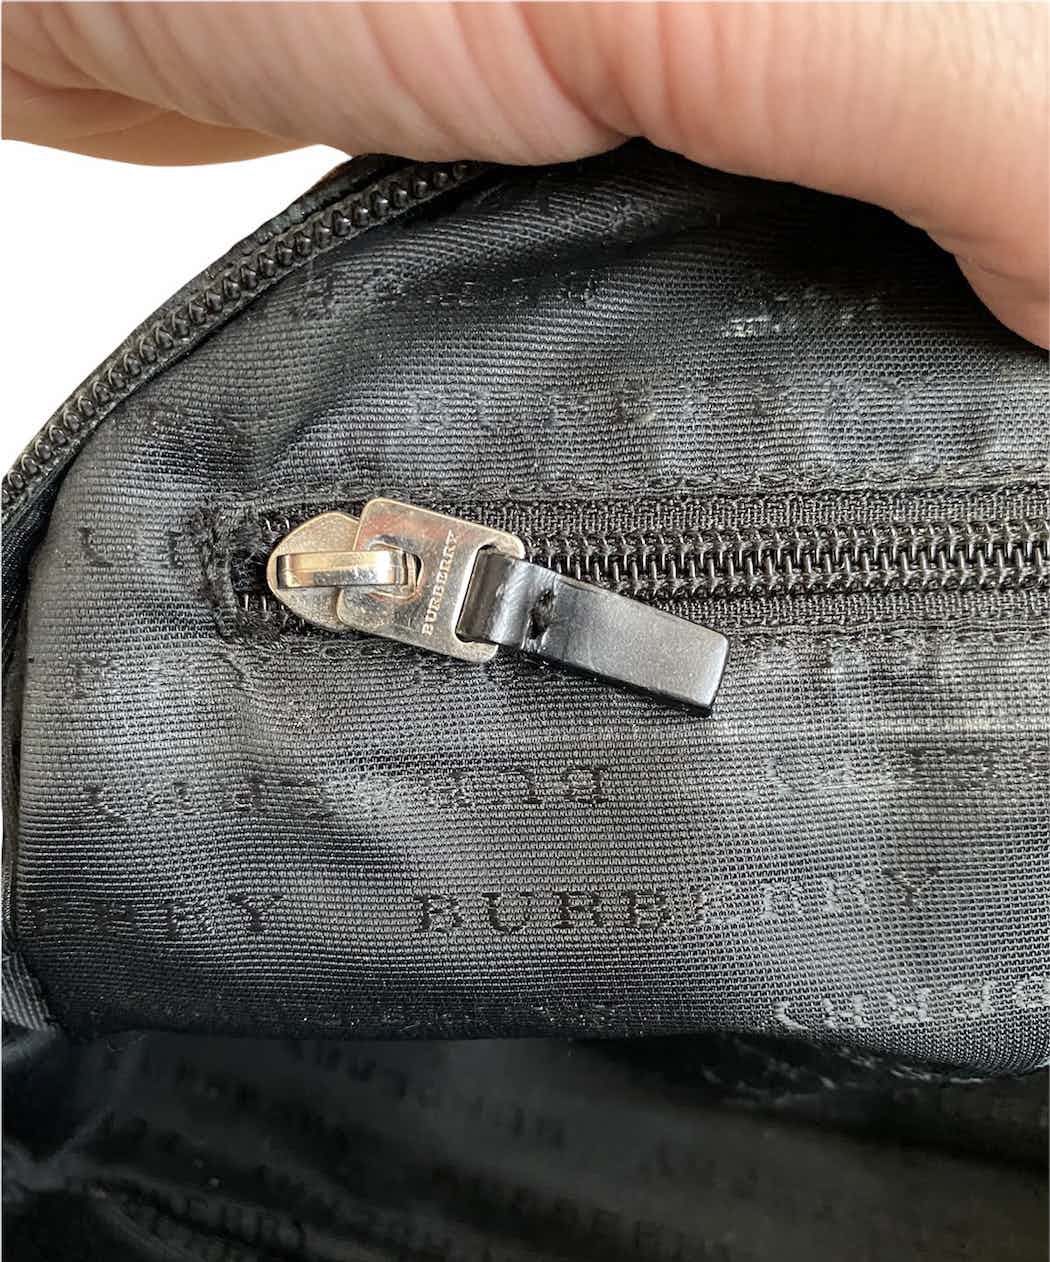 BURBERRY bag for Sale in Fresno, TX - OfferUp